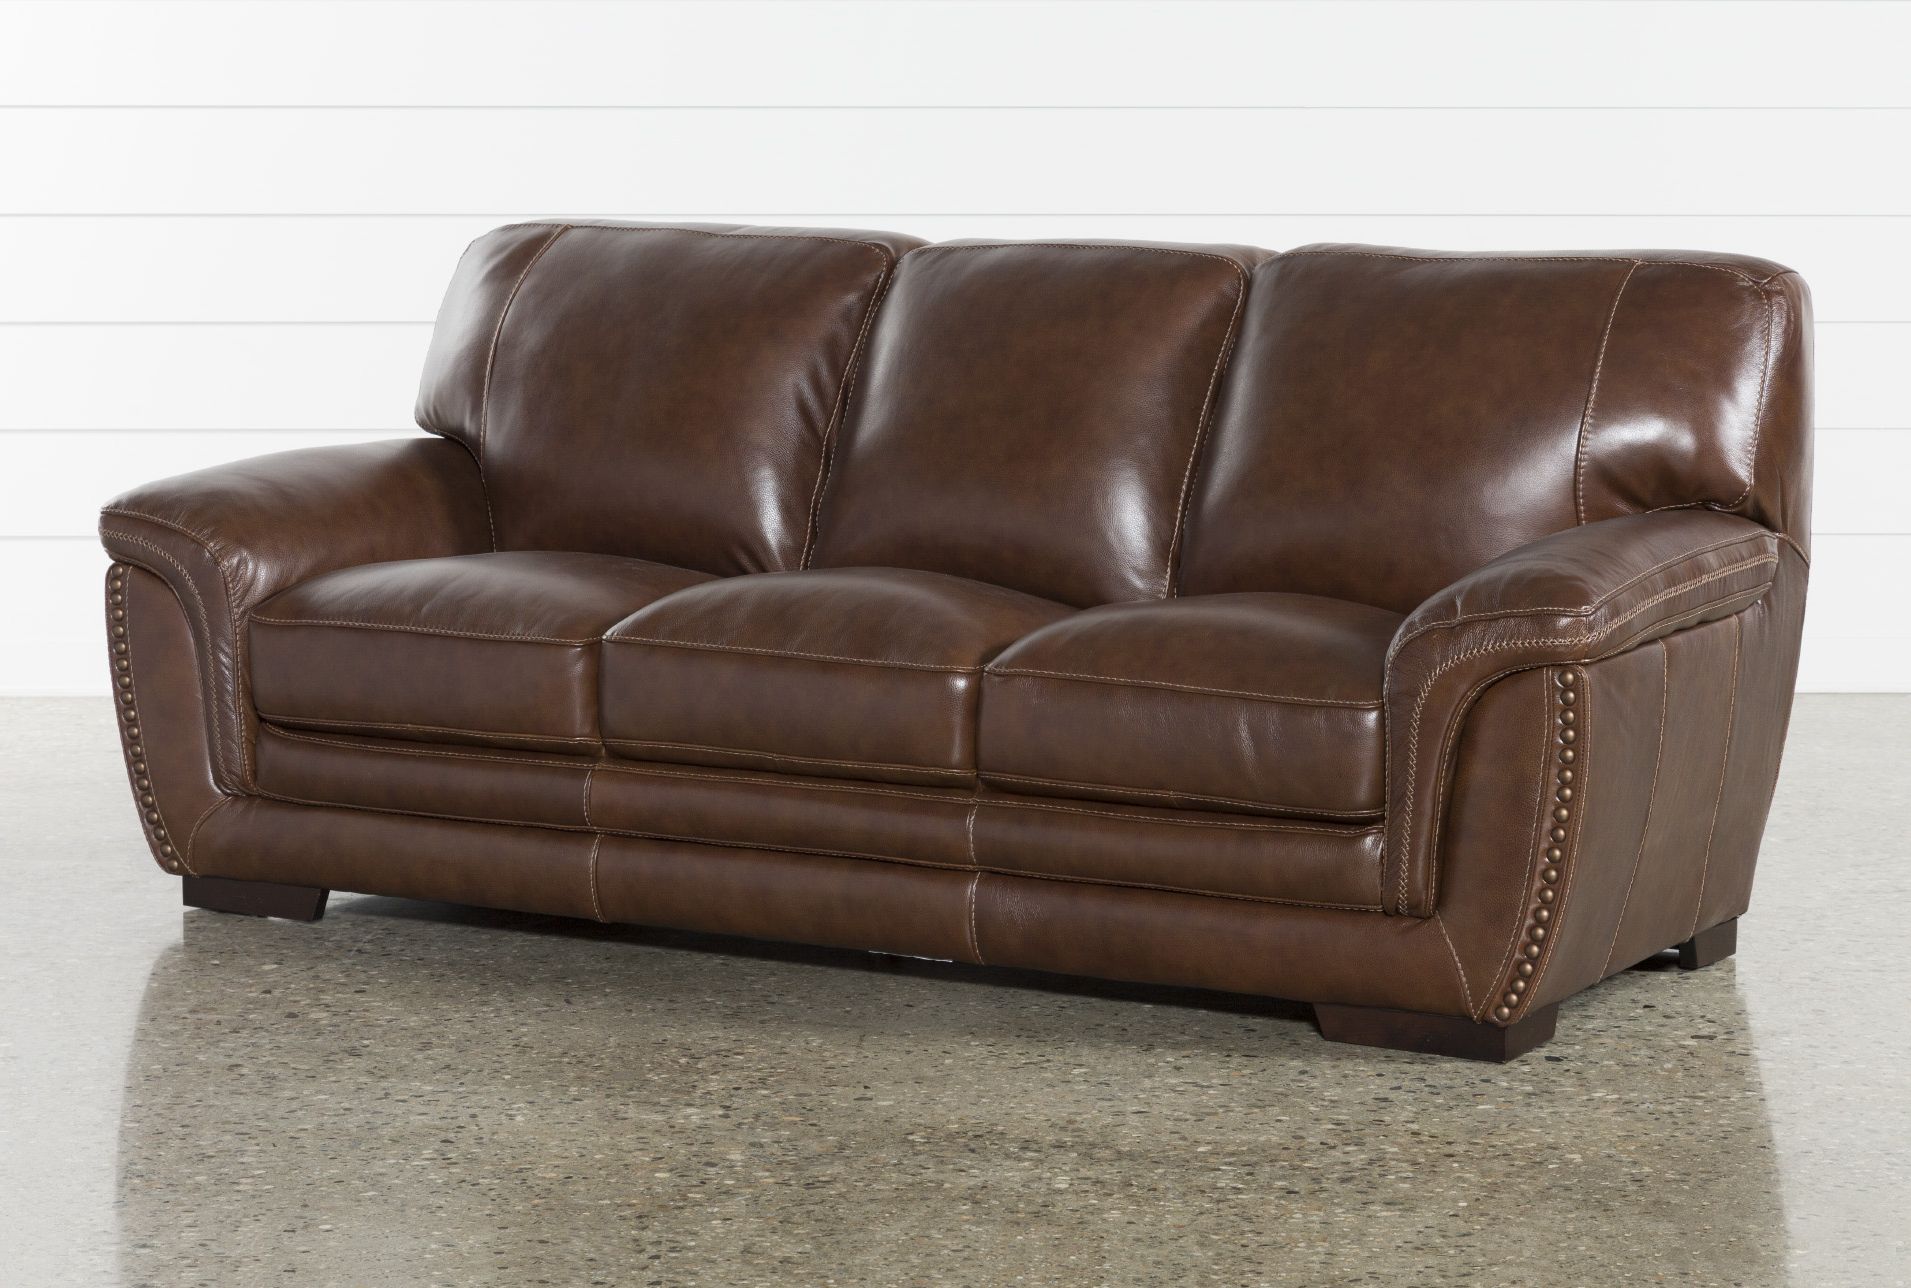 Get Brown Leather Sofa – Its Classy And Practical Pertaining To Best And Newest Faux Leather Sofas In Dark Brown (View 15 of 15)